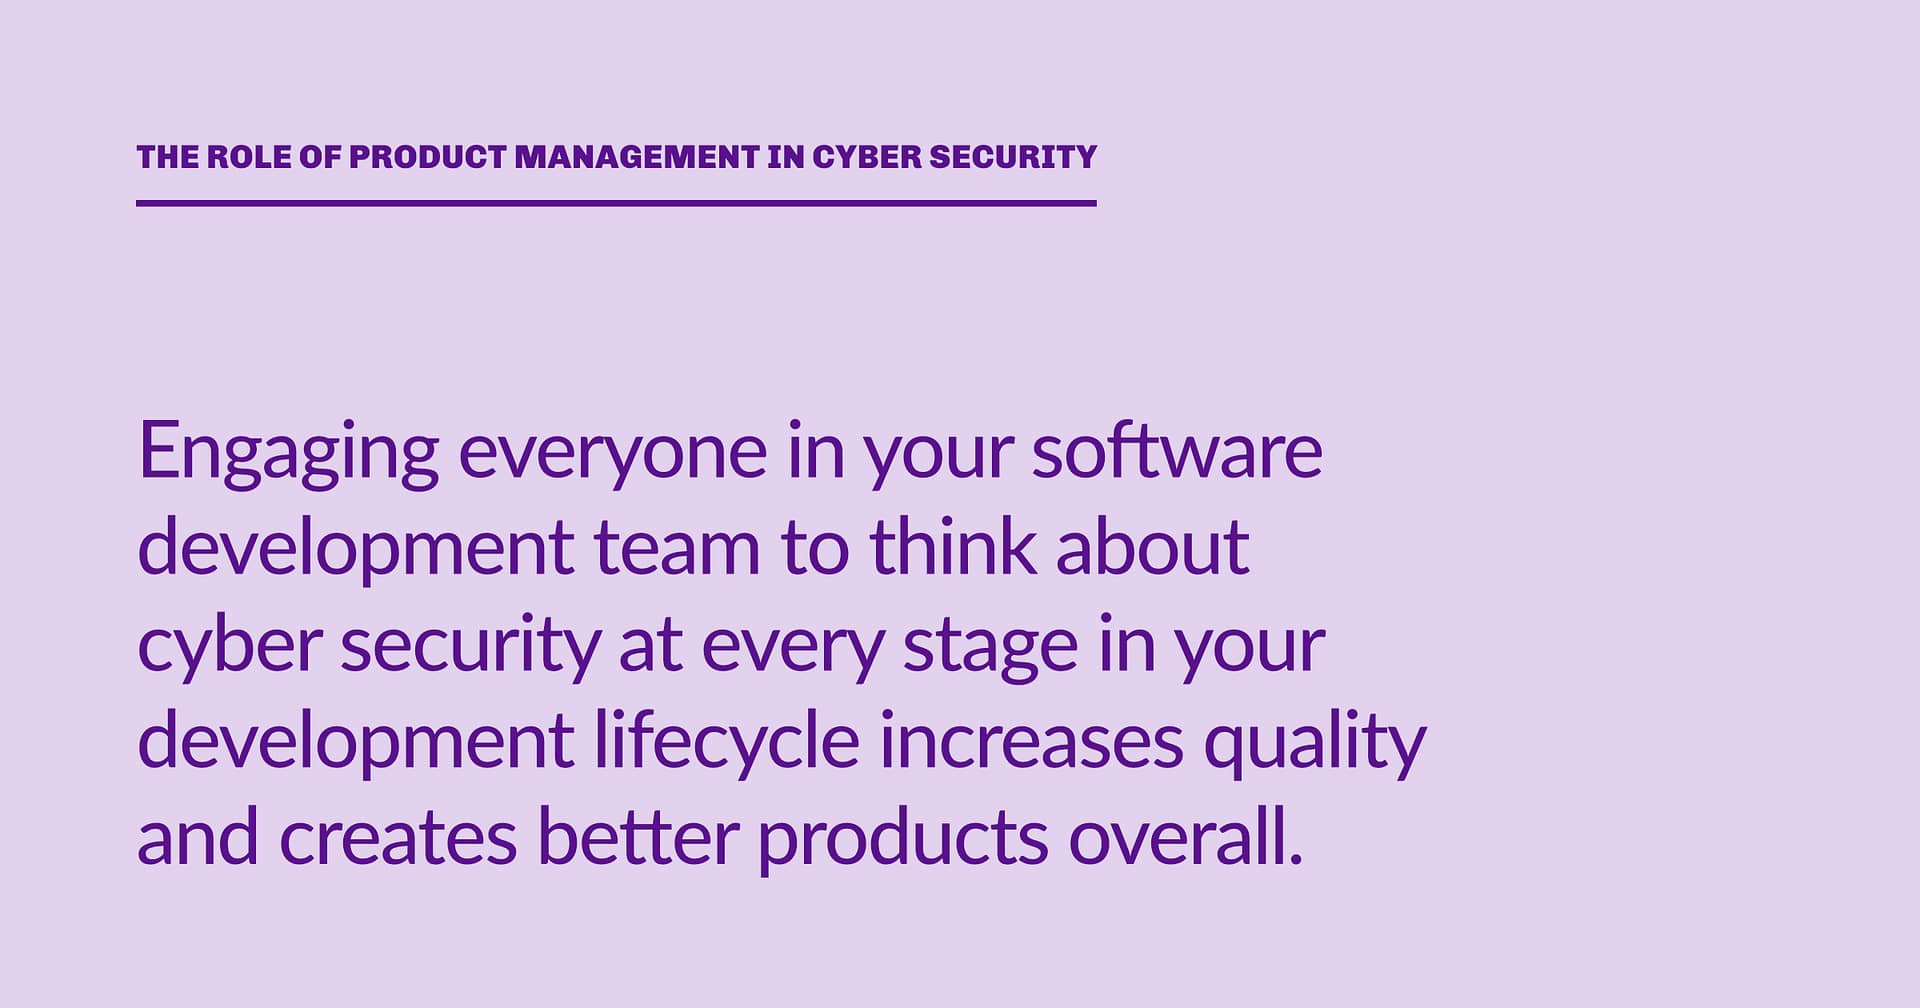 Highlight block: Engaging everyone in your software development team to think about cyber security at every stage in your development lifecycle increases quality and creates better products overall.